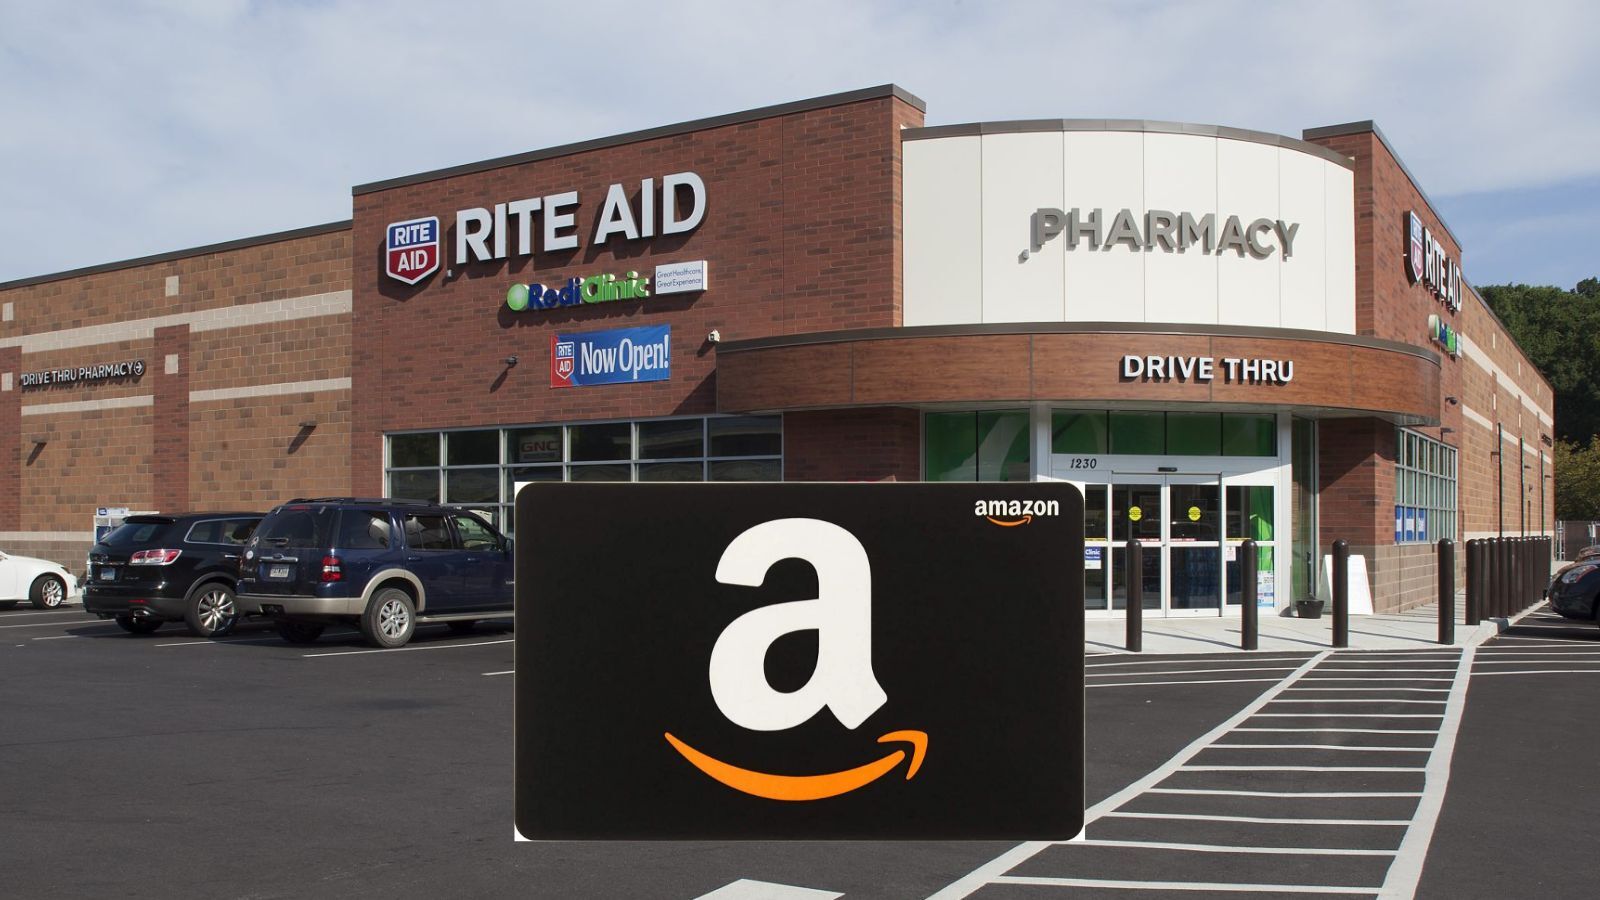 Does Rite Aid Sell Amazon Gift Cards? (Yes, But They Can Be Difficult to Get)